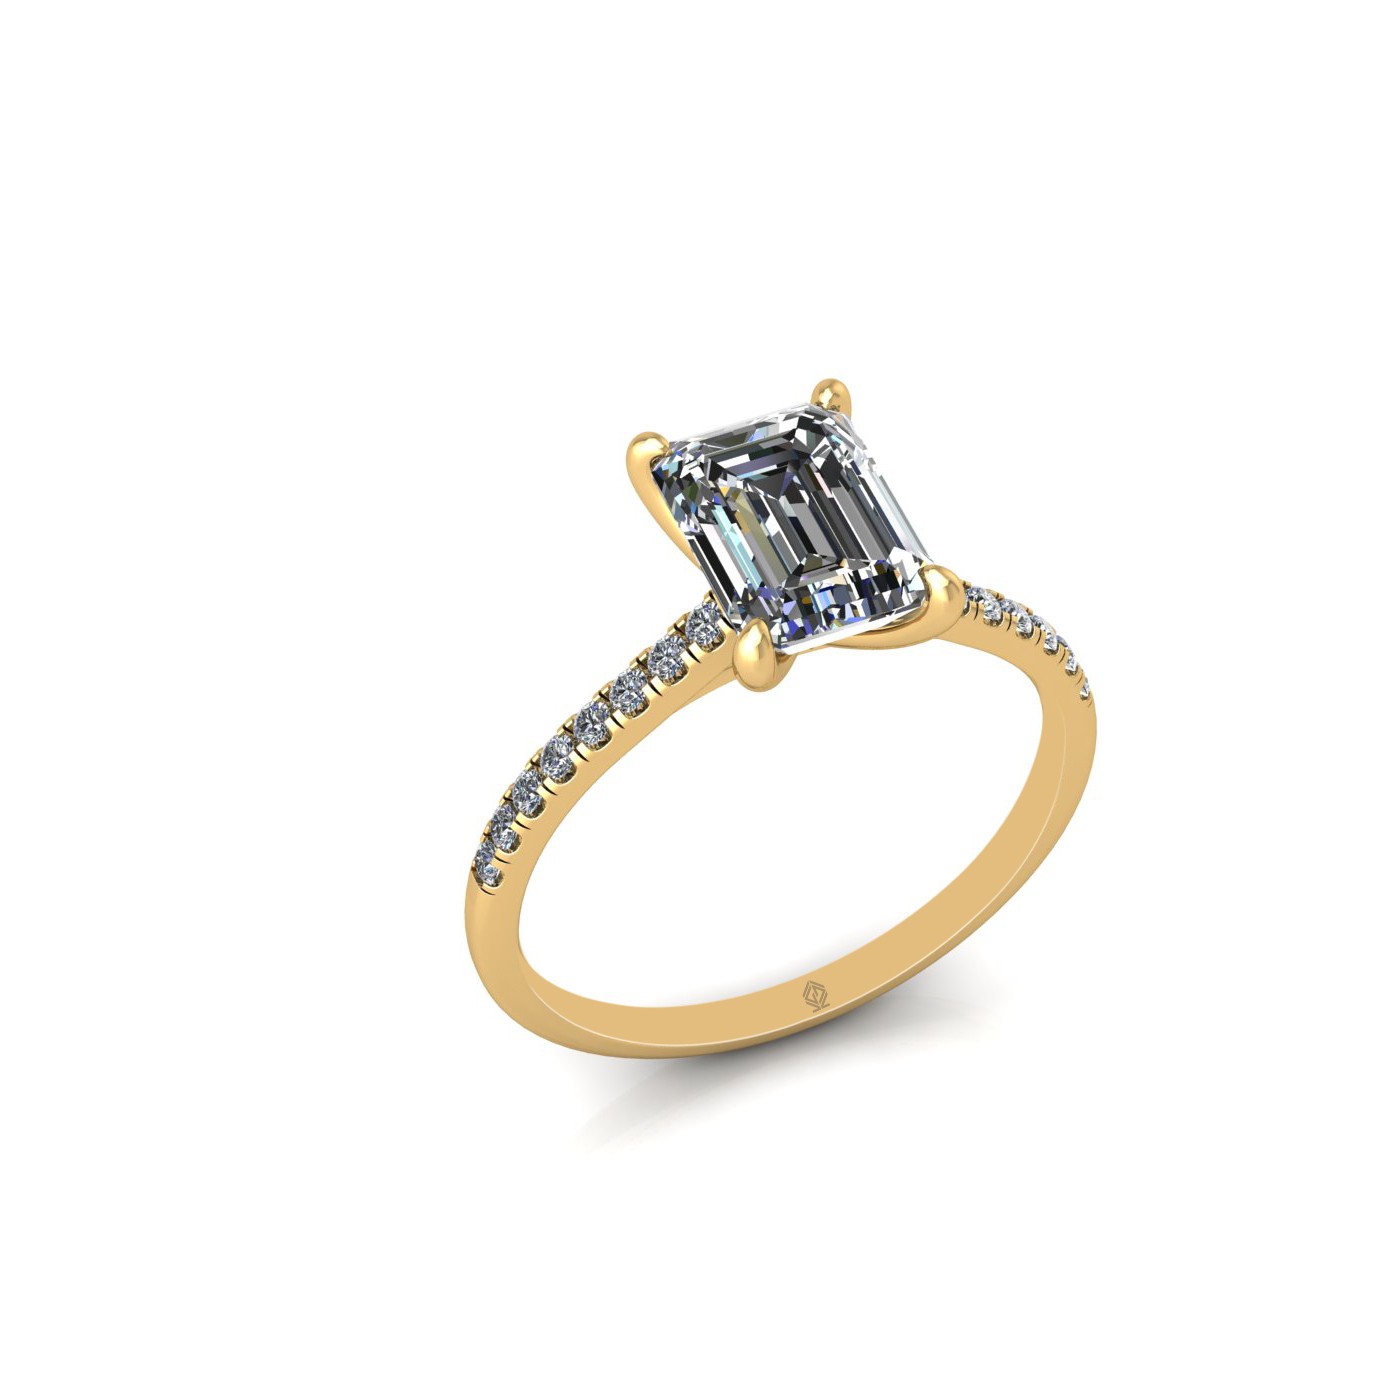 18k yellow gold 1.5ct 4 prongs emerald cut diamond engagement ring with whisper thin pavÉ set band Photos & images